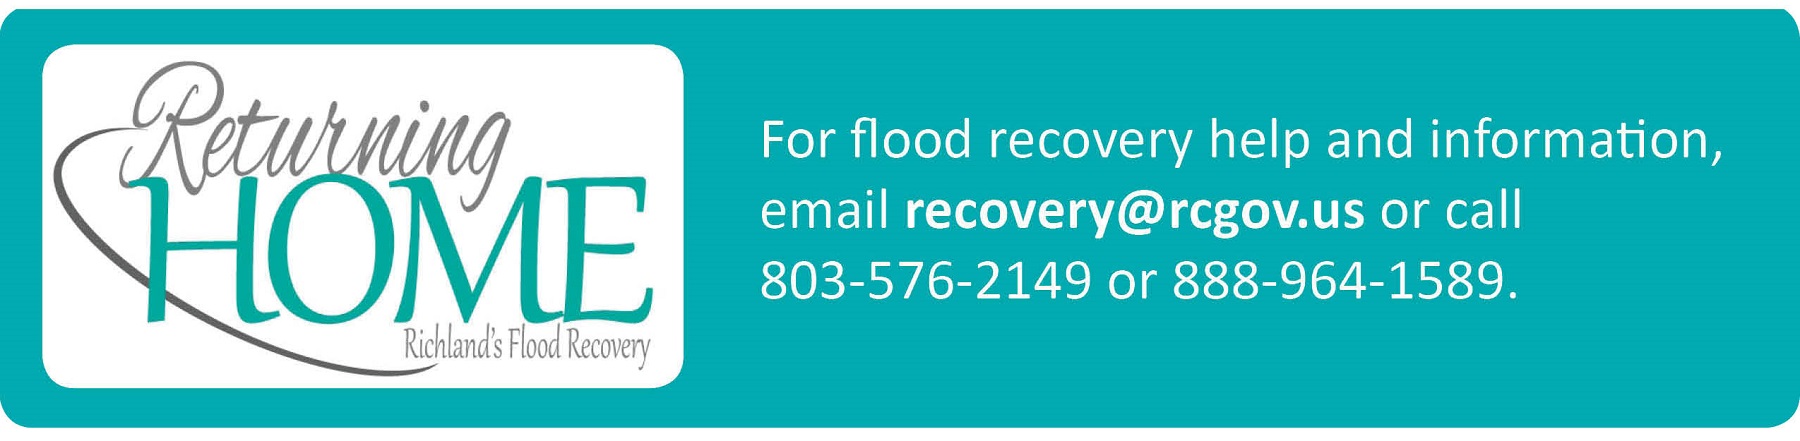 Returning Home Richland's Flood Recovery For flood rcovery help and information call 803-576-2149 or 888-964-1589